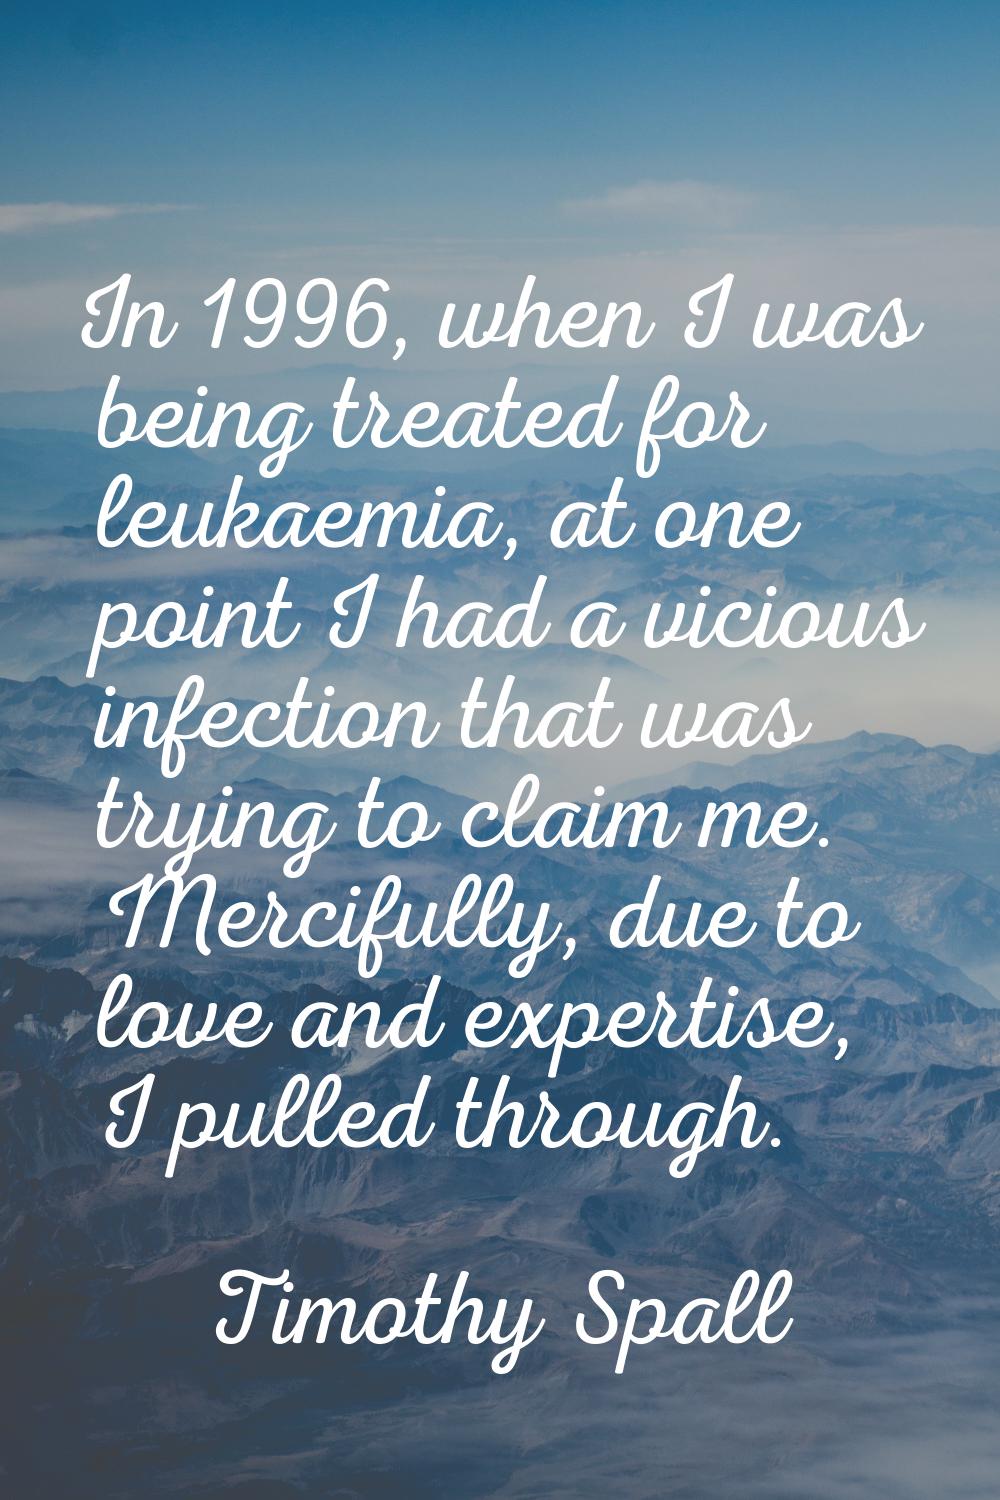 In 1996, when I was being treated for leukaemia, at one point I had a vicious infection that was tr